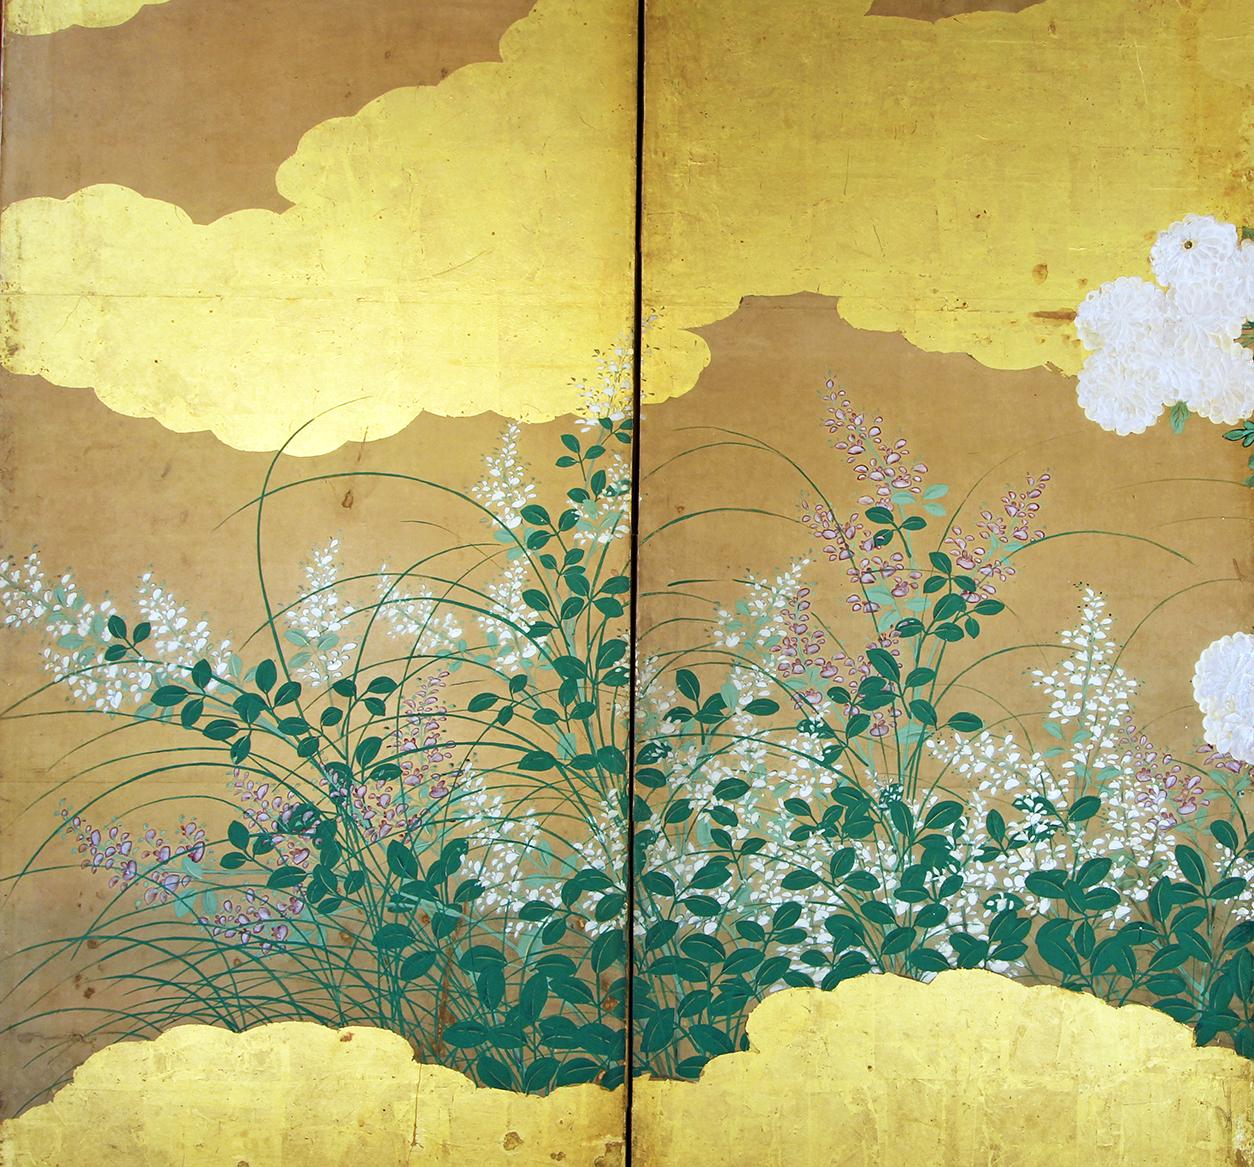 Clouds of gold, water and many colorful flowers: Japanese six-panel folding screen by Rimpa School. Hand painted with rice mineral pigments and inks on rice paper and gold leaf.